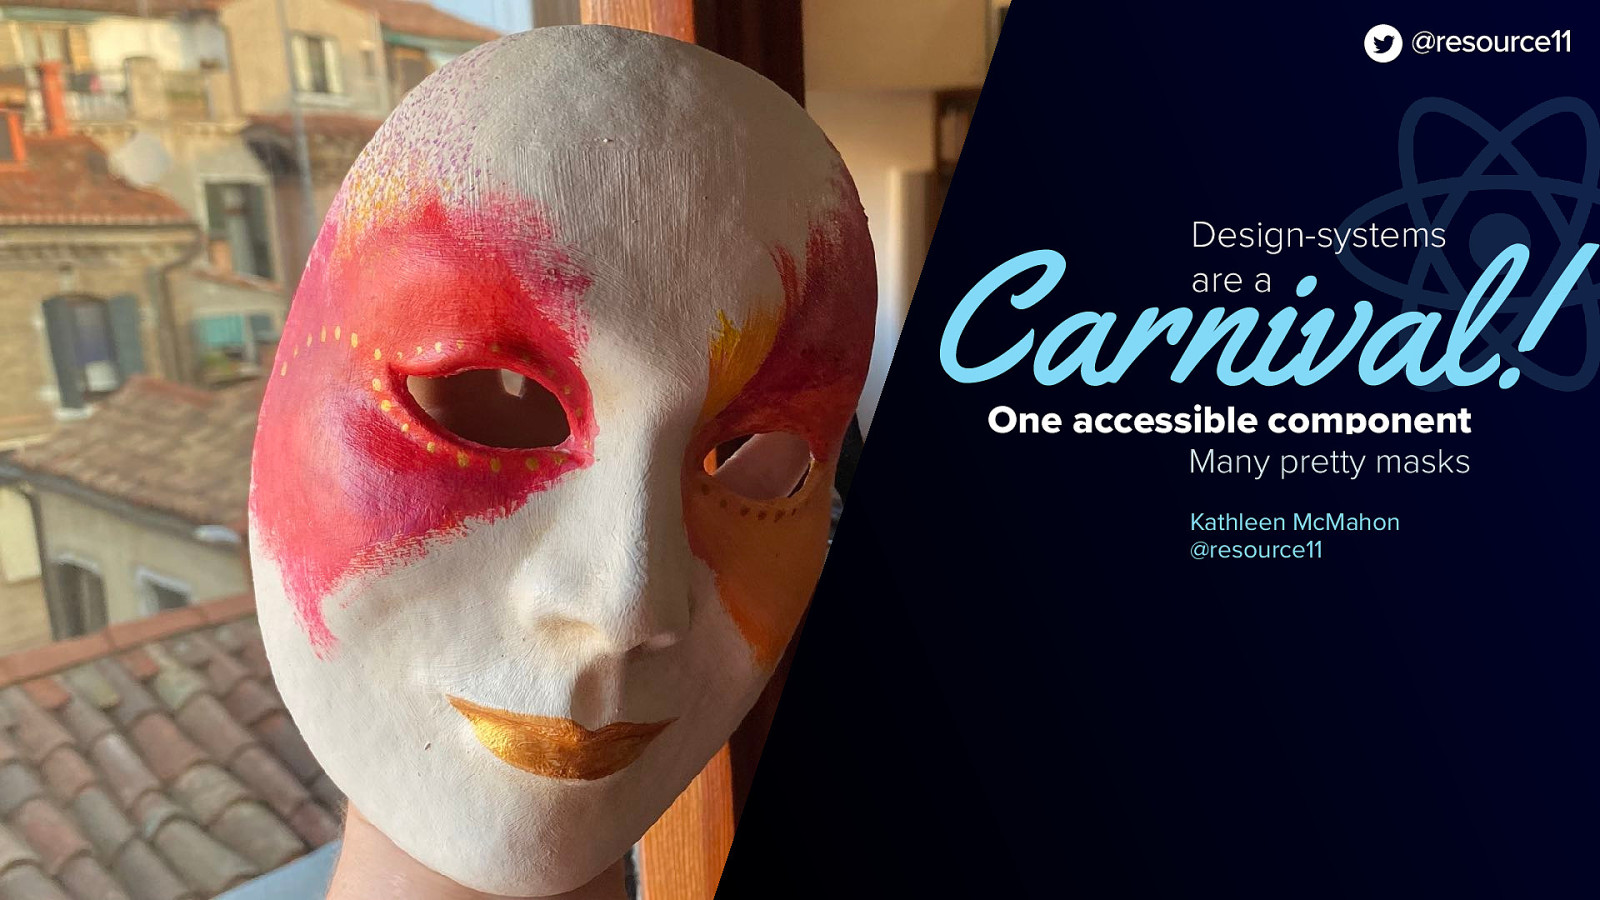 Design-systems are a Carnival! One accessible component Many pretty masks | Kathleen McMahon @resource11